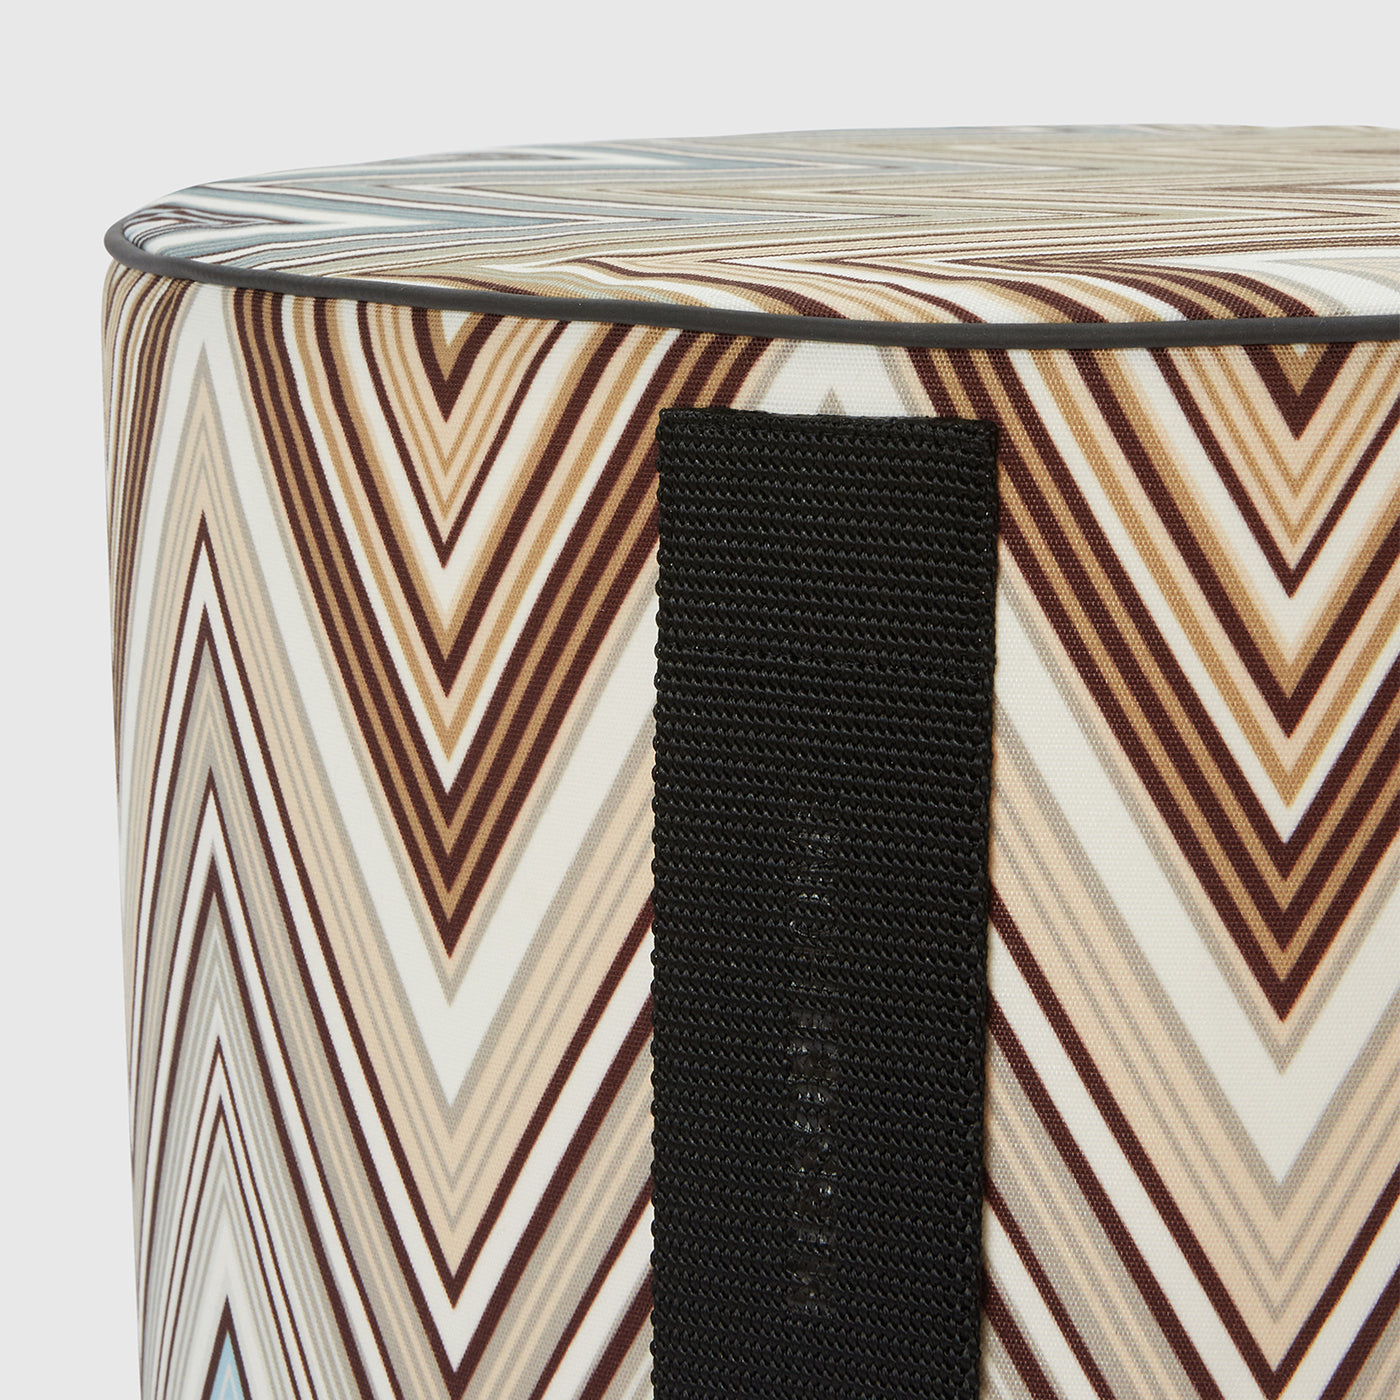 Kew Cylindrical Zigzag Pattern Outdoor Pouf #1 - Alternative view 1